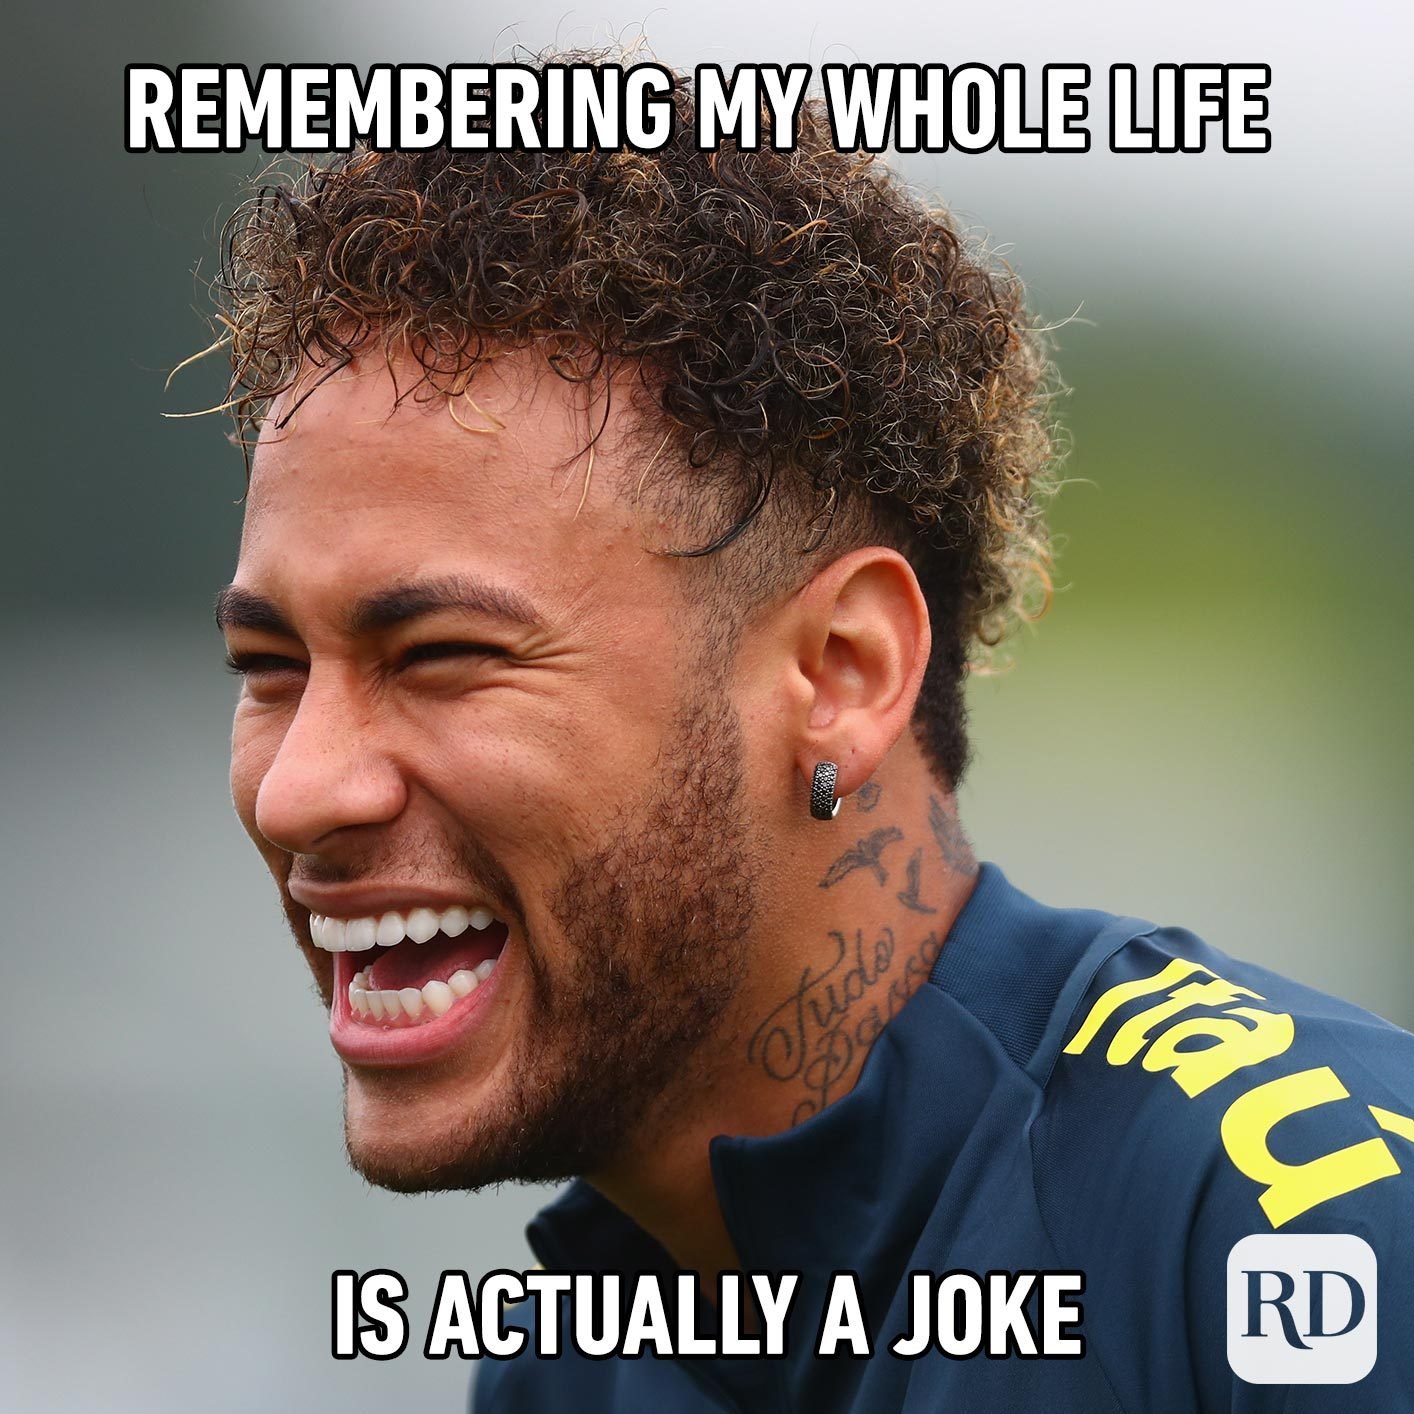 Man laughing. Meme text: Remembering my whole life is actually a joke